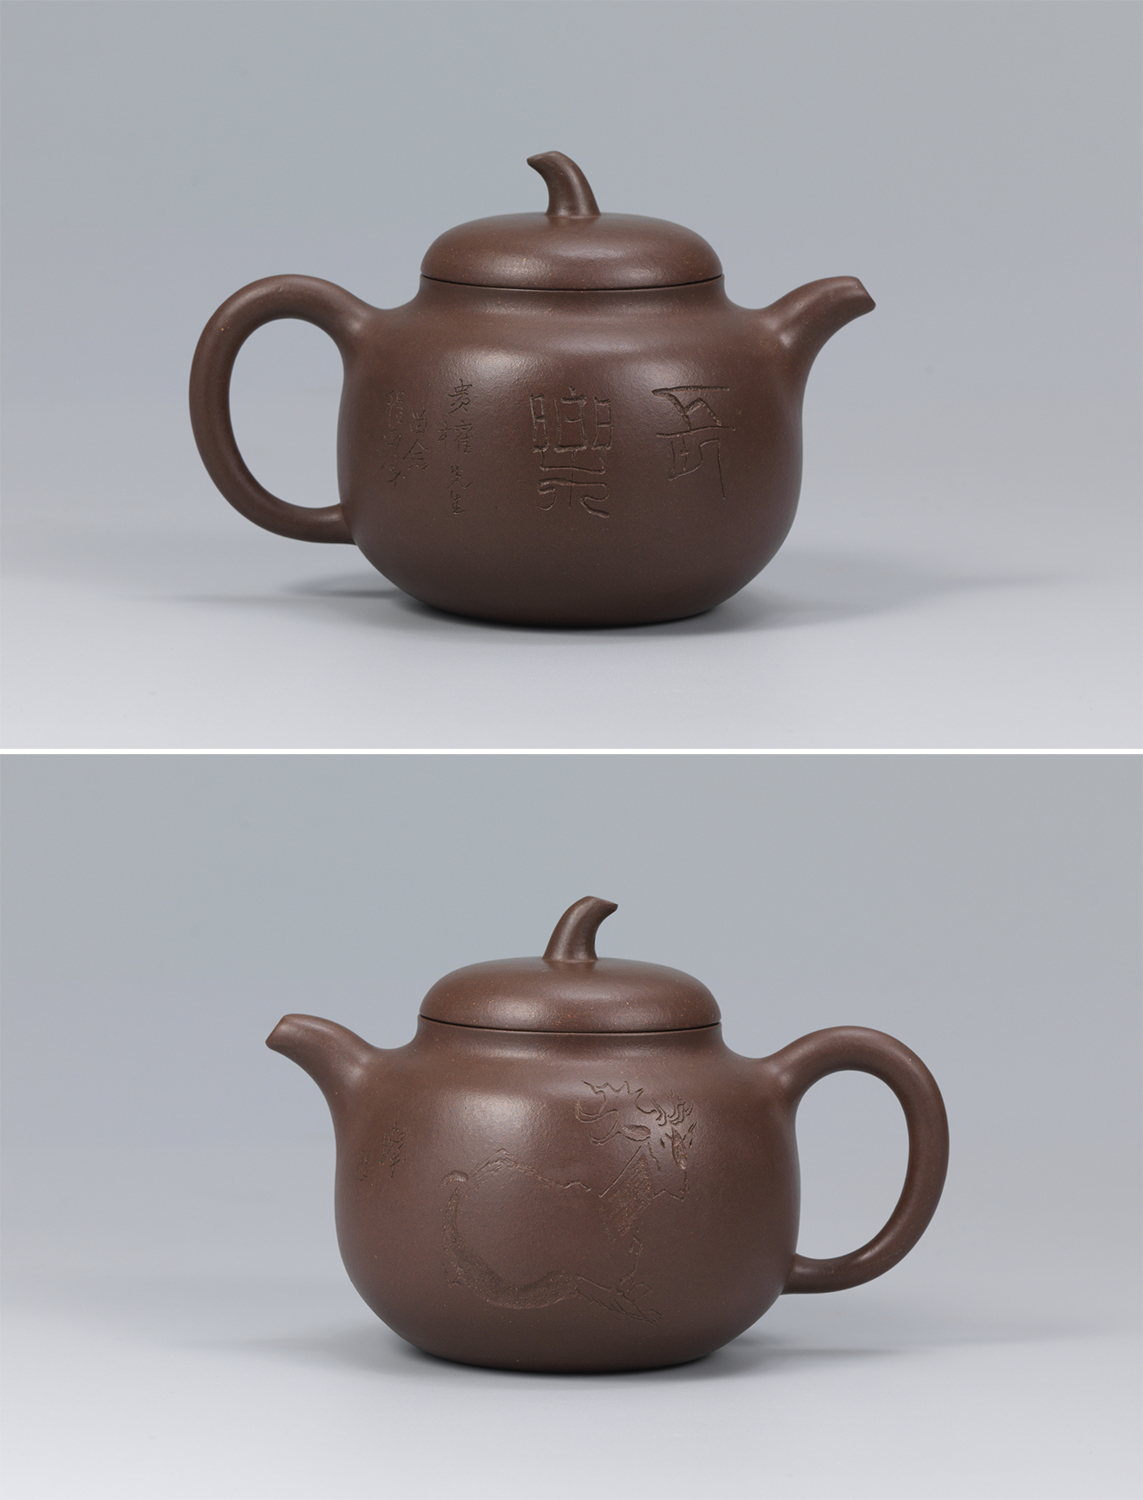 Teapot of gourd shape in purple clay with recumbent deer